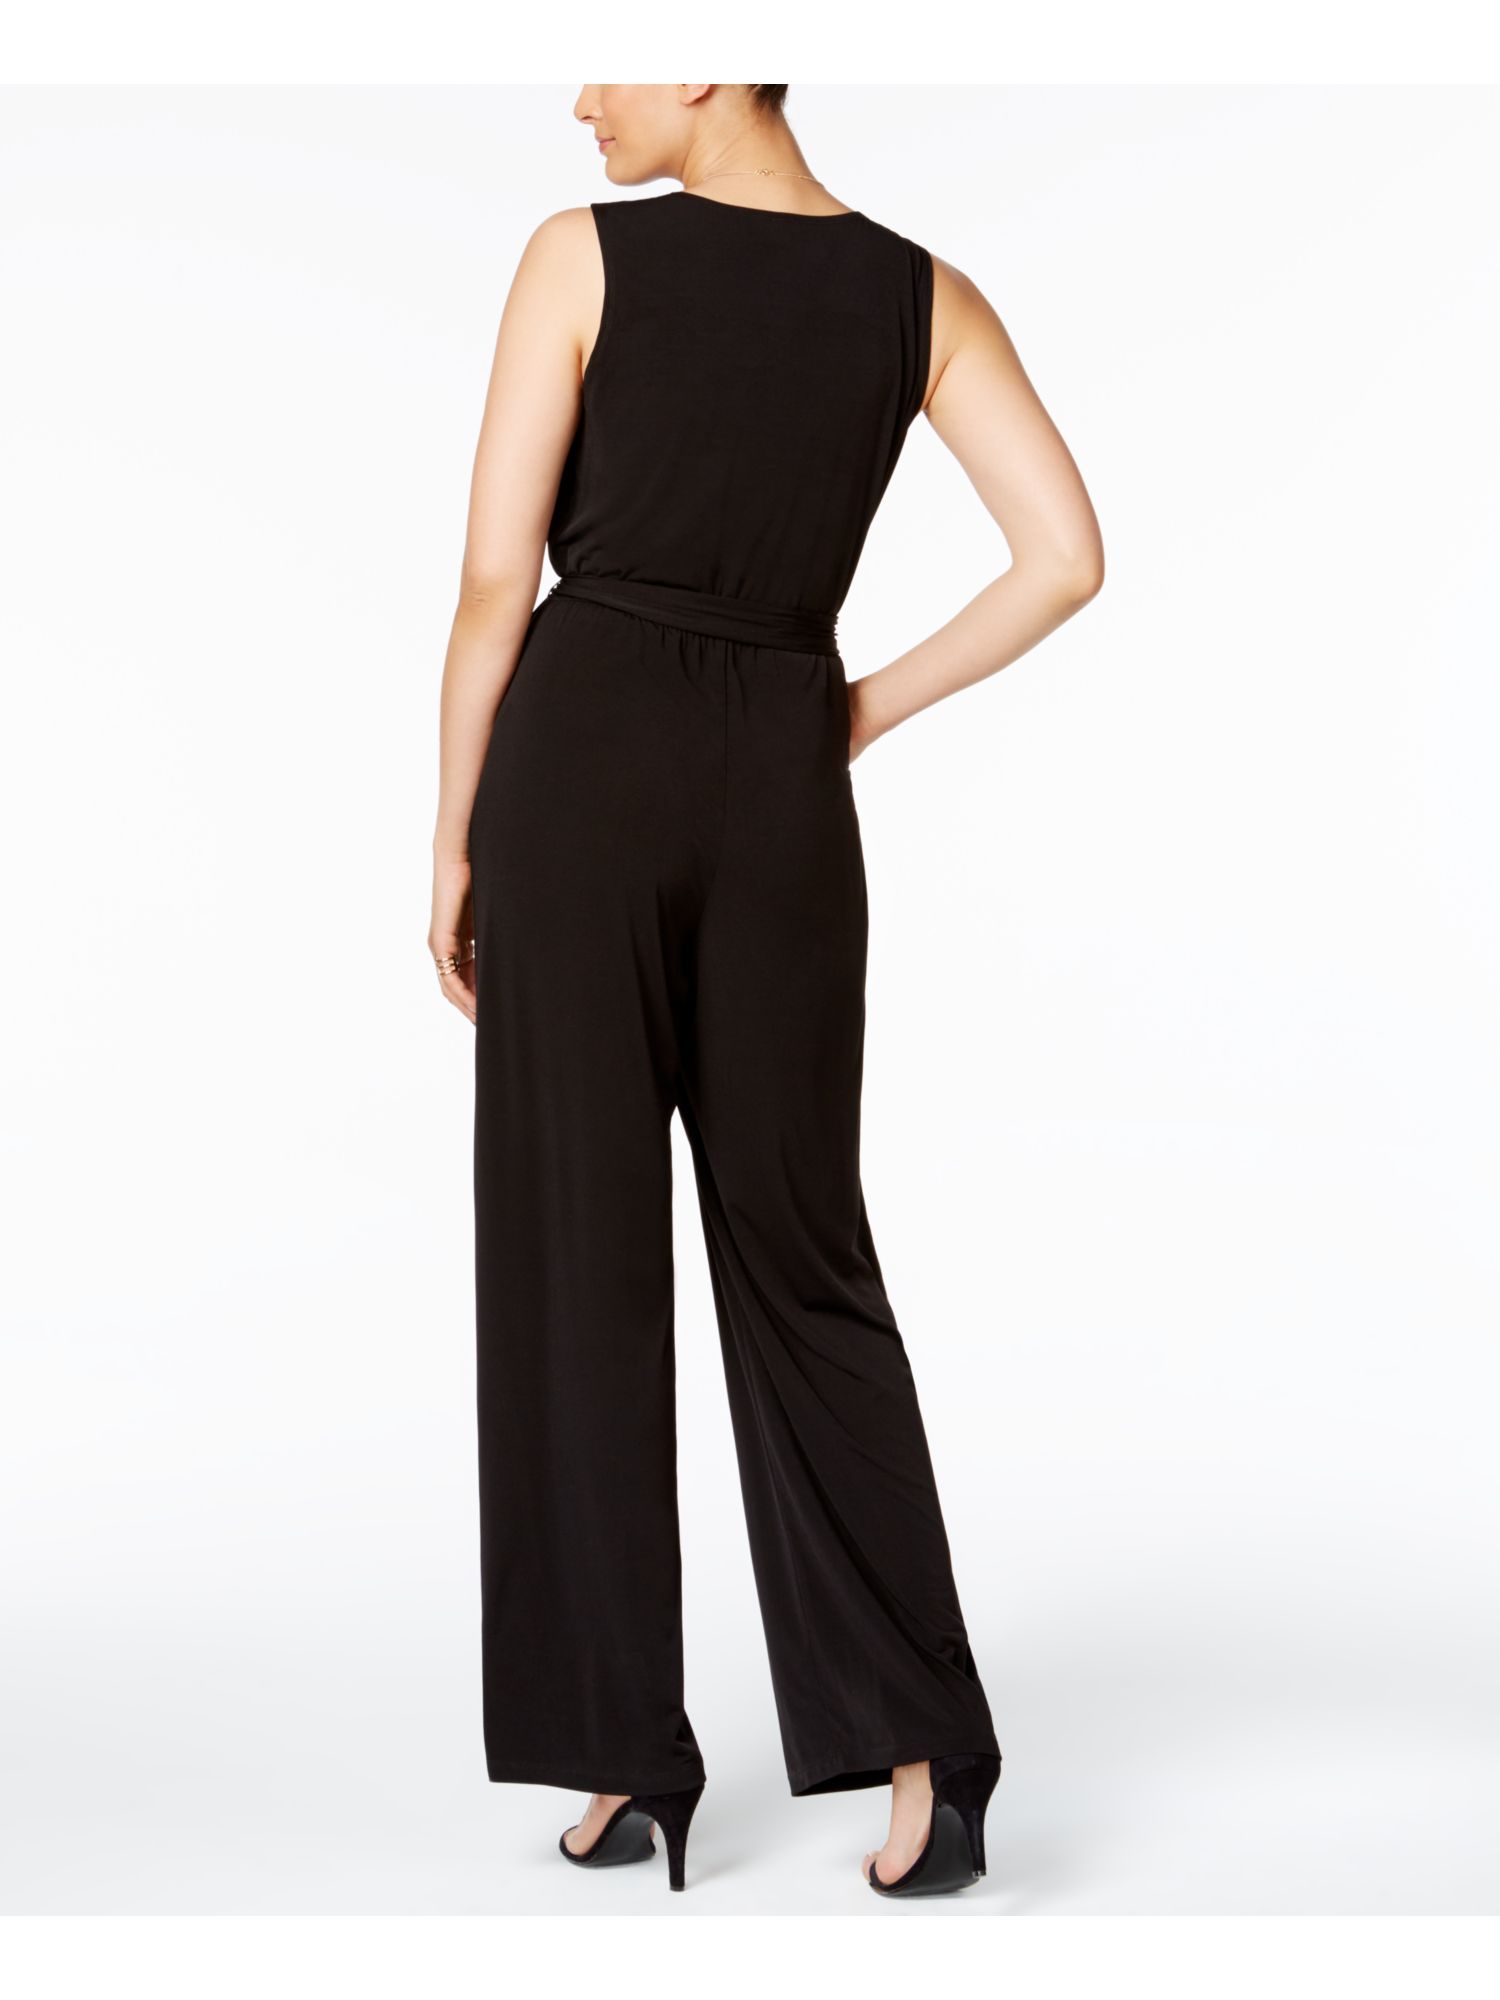 NY COLLECTION PETITE Womens Black Ruched Tie Evening Jumpsuit Petites PXS